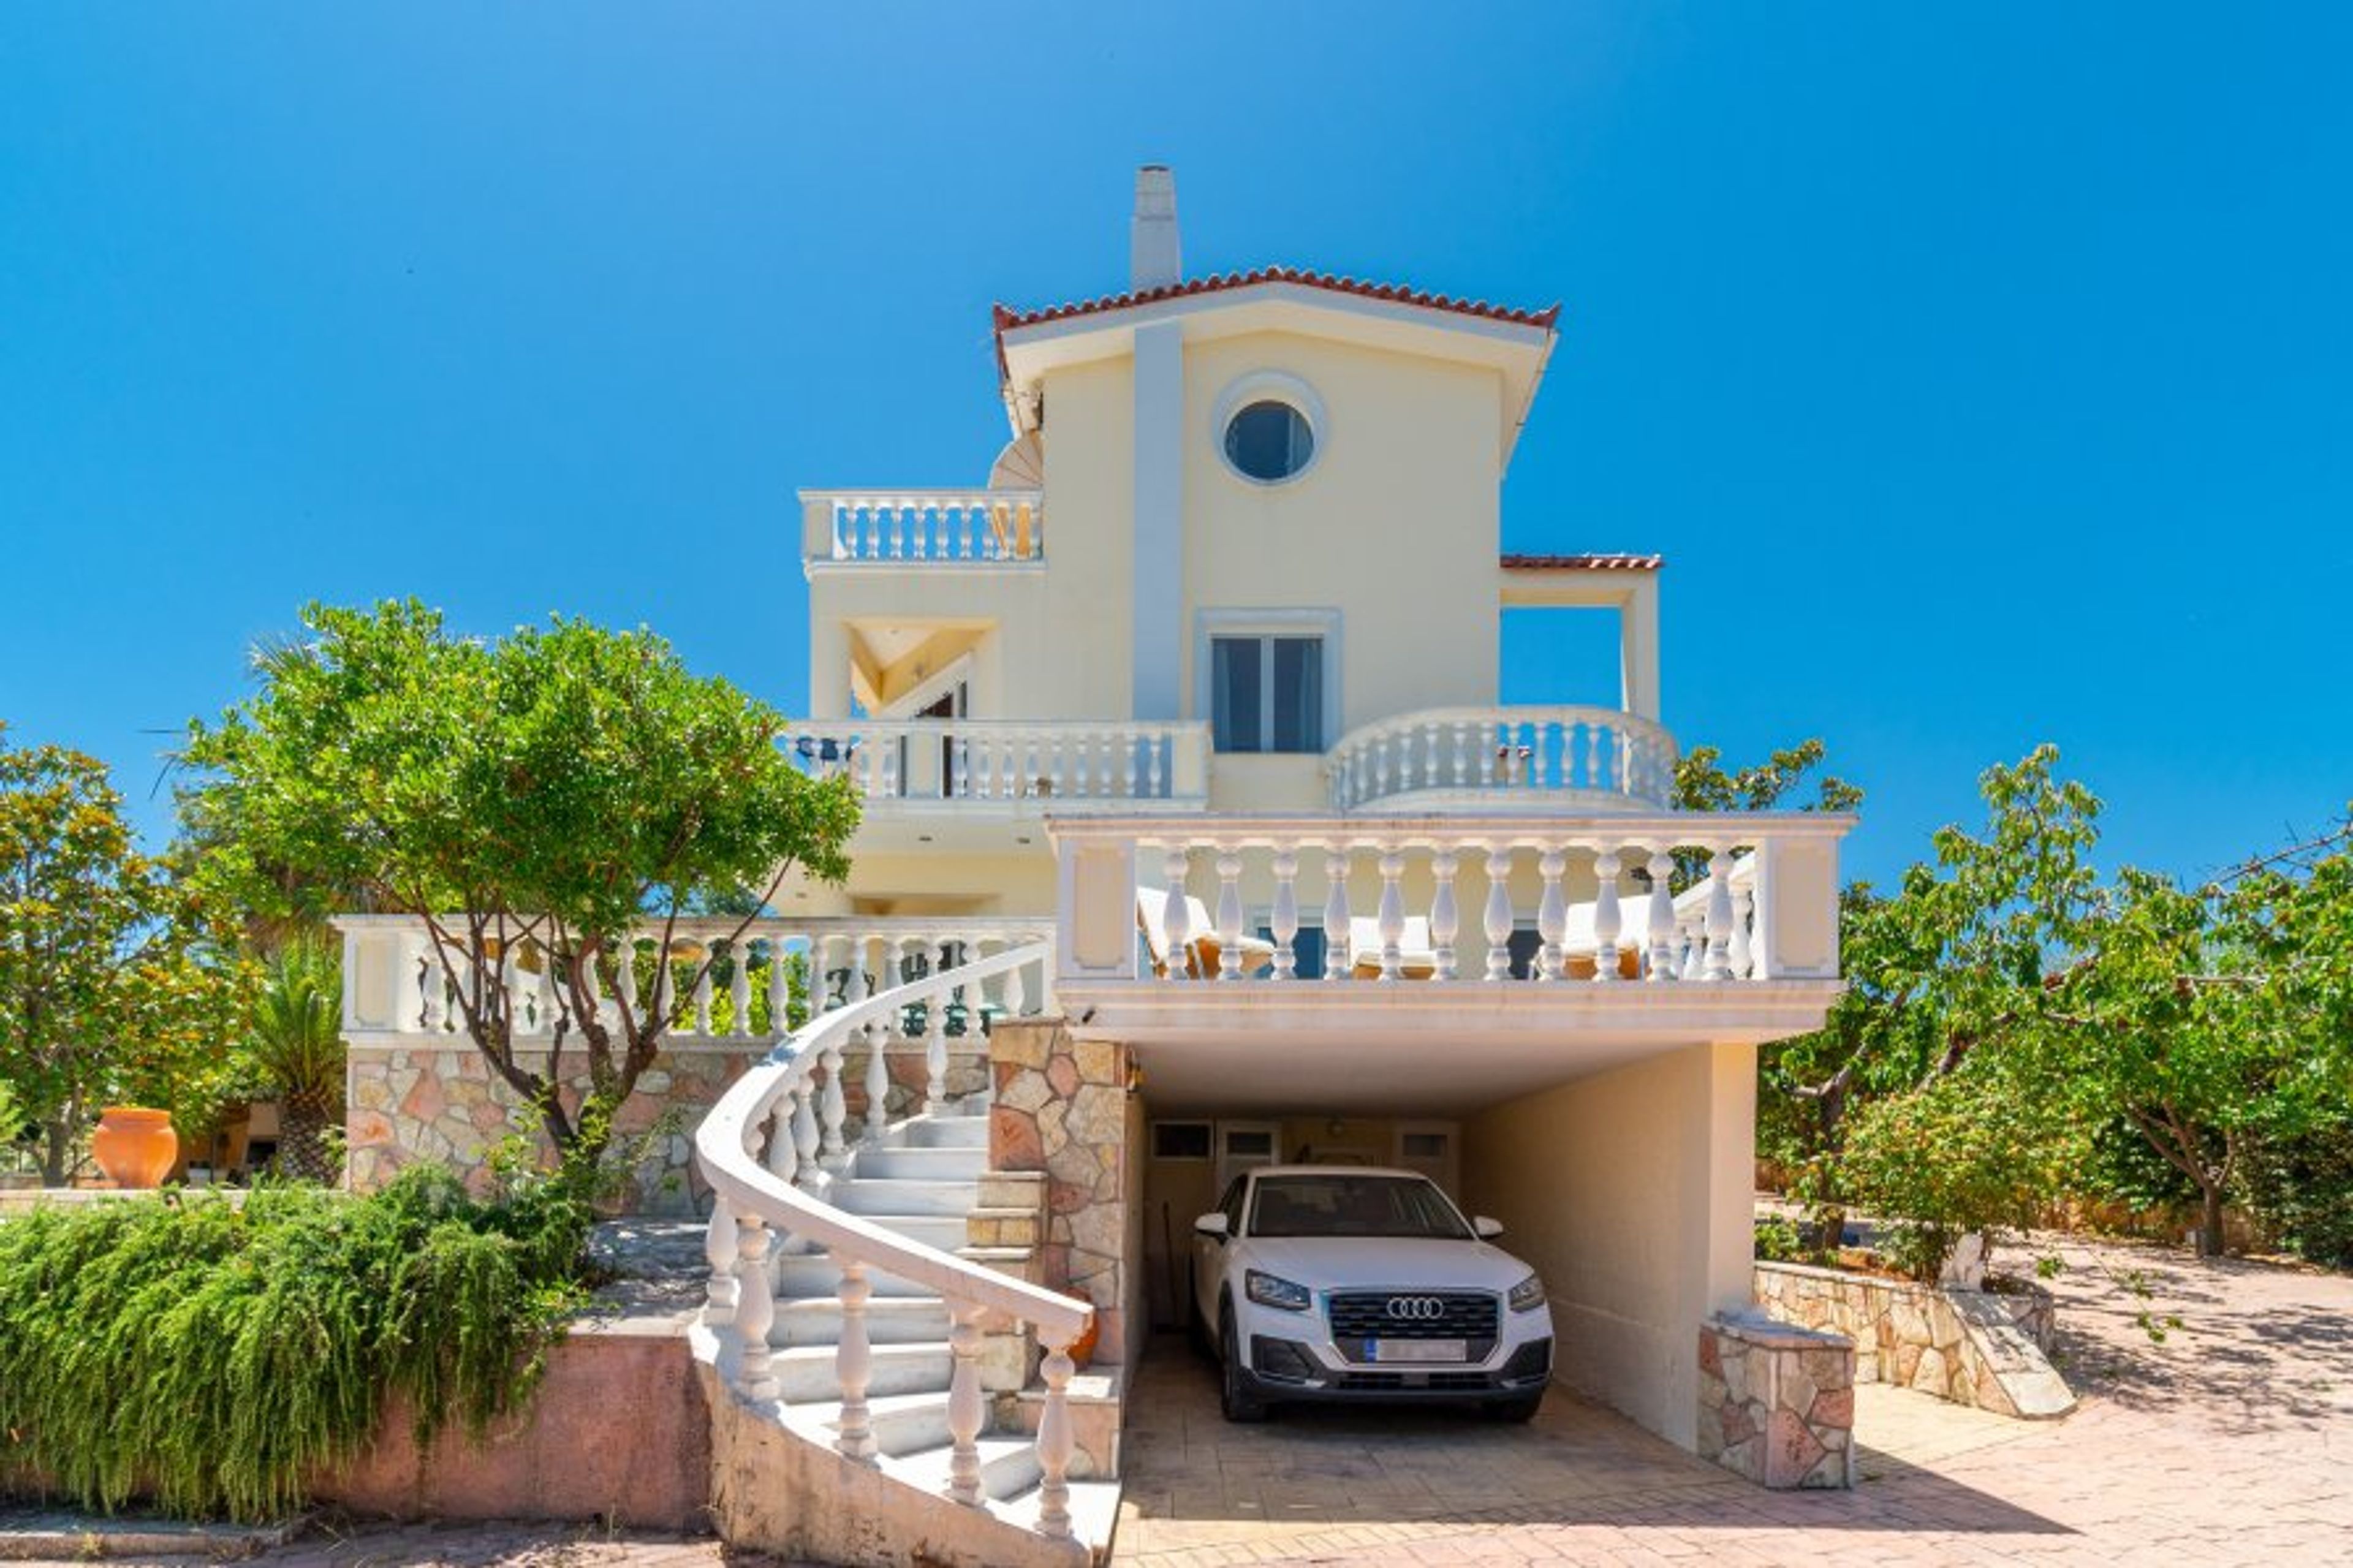 1.2 A different angle of the villa showing the private parking